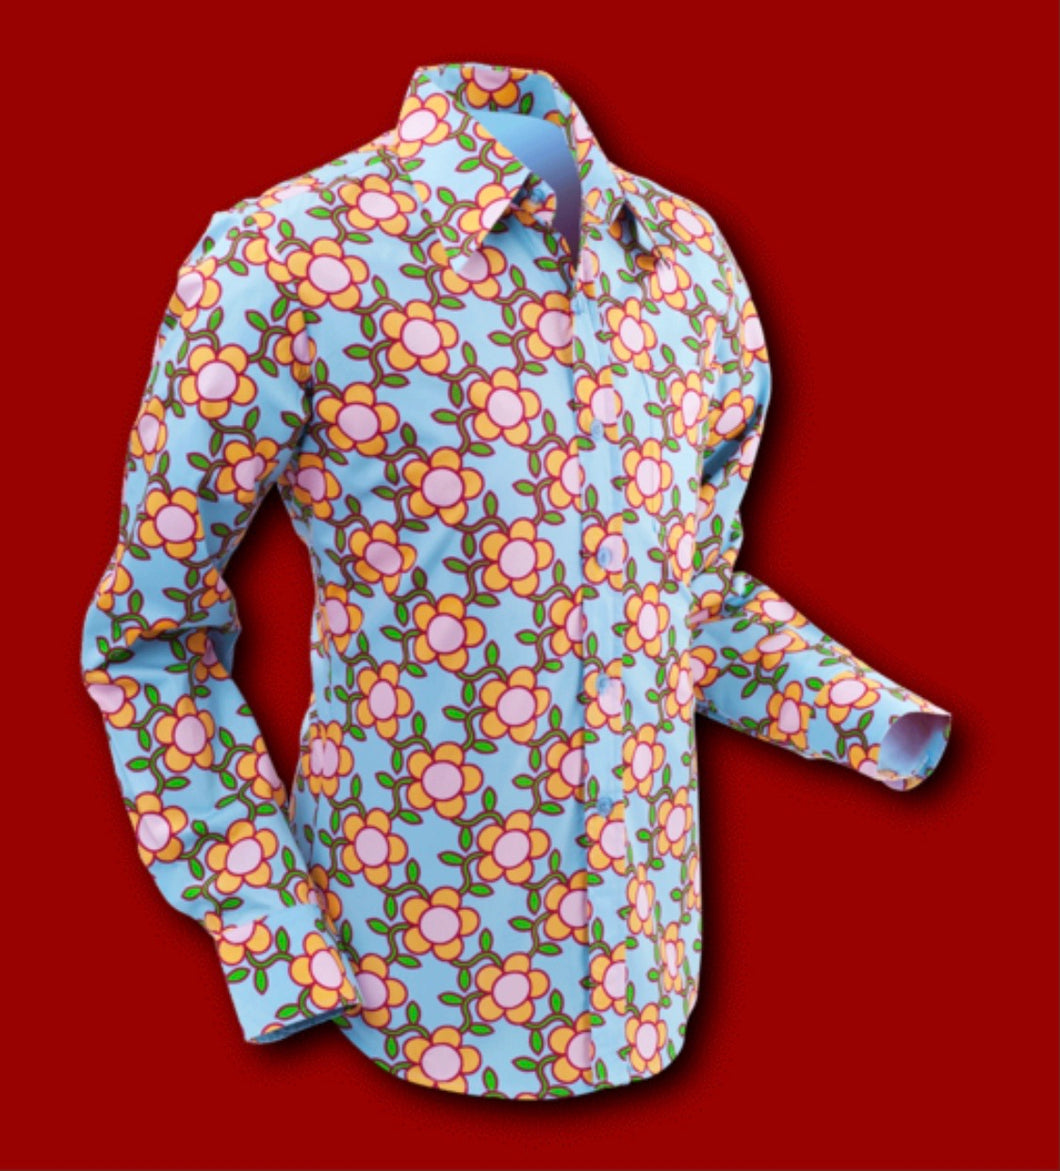 Flowergrid design long sleeved Retro 70s style shirt in Blue